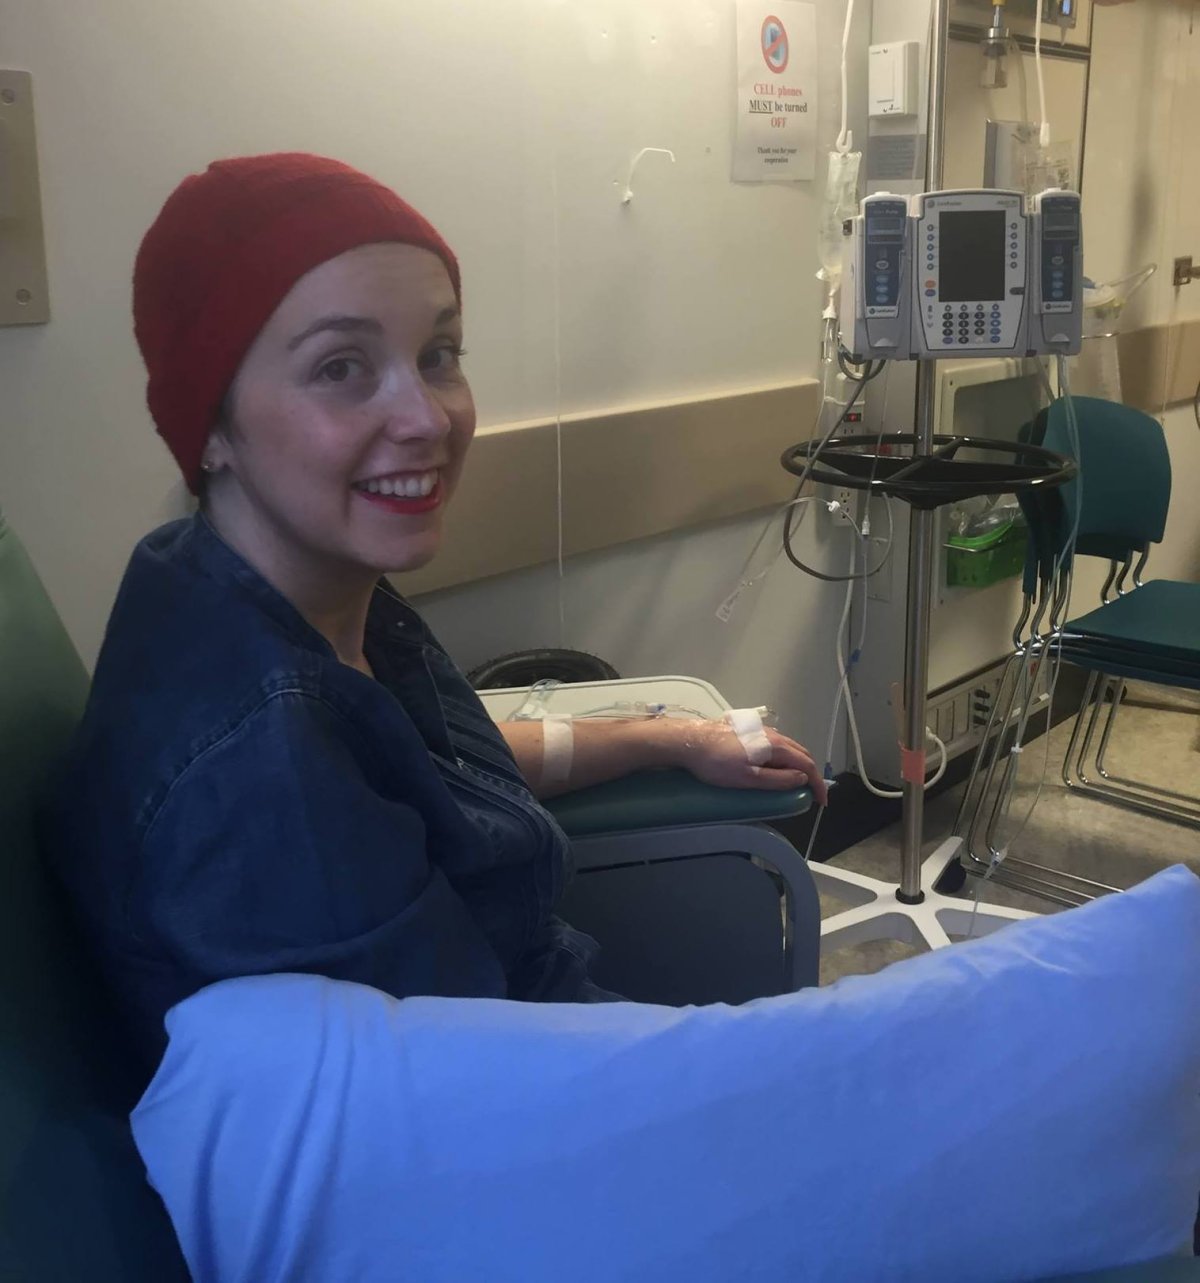 Erin Barrett has shared her story about her battle with ovarian cancer online.